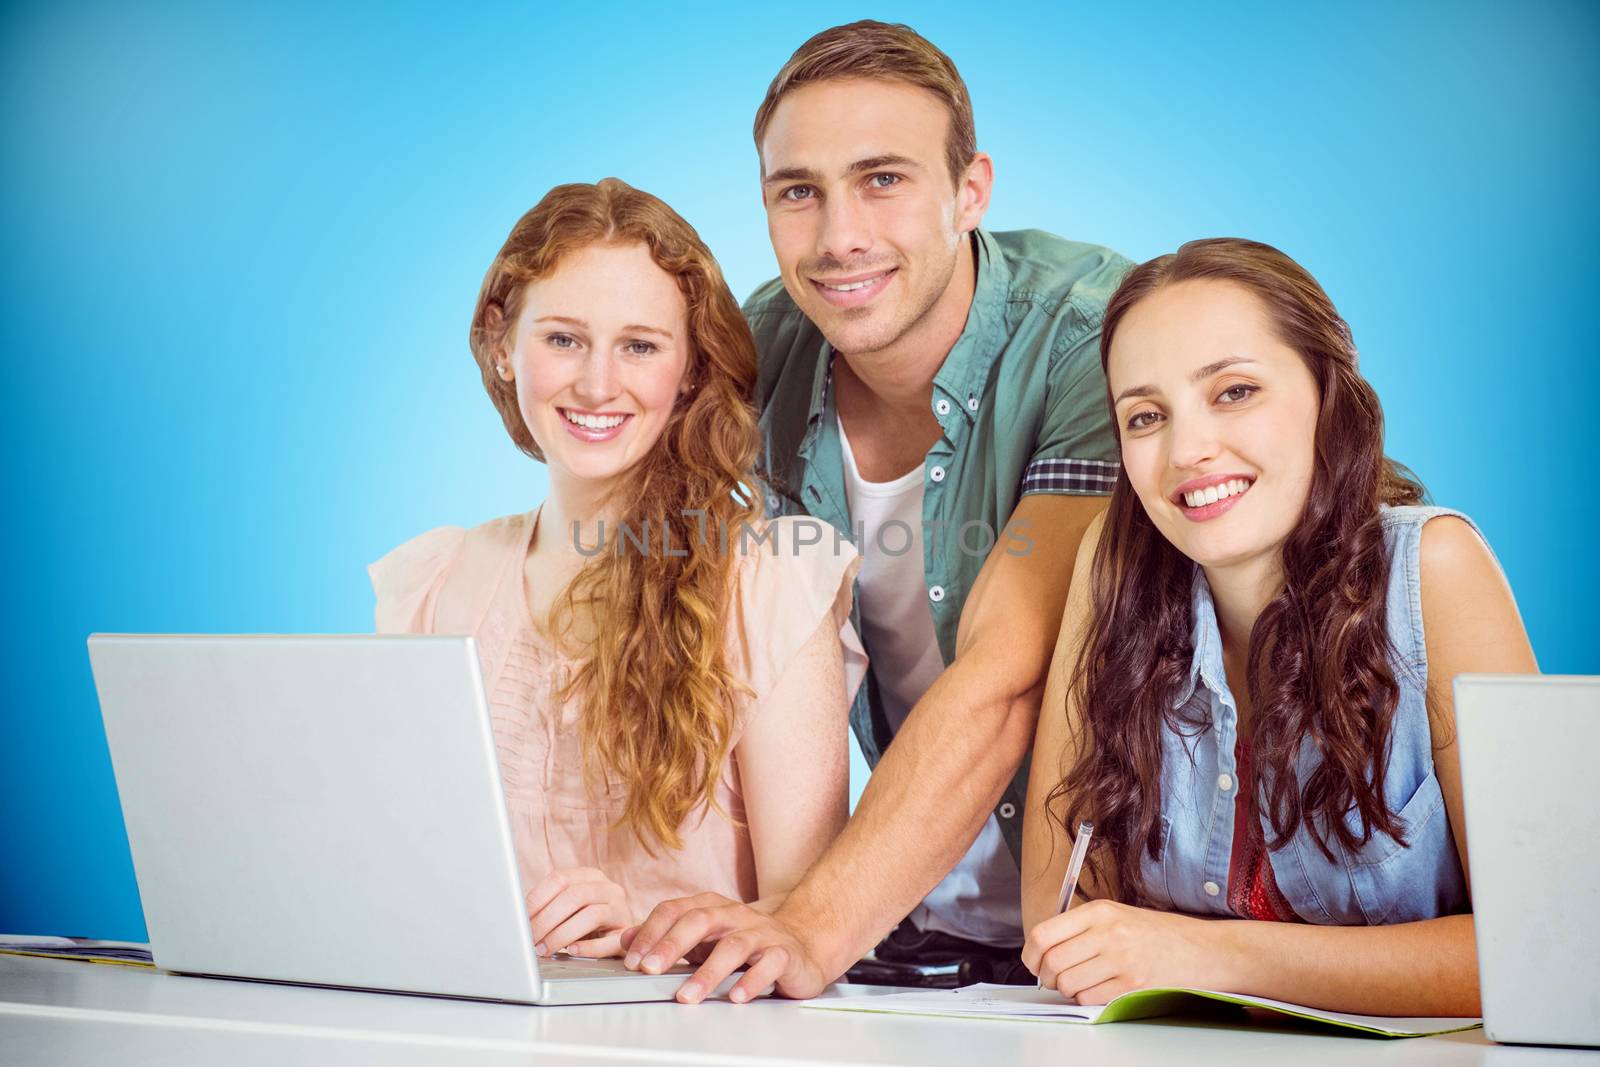 Fashion students using laptop against blue background with vignette